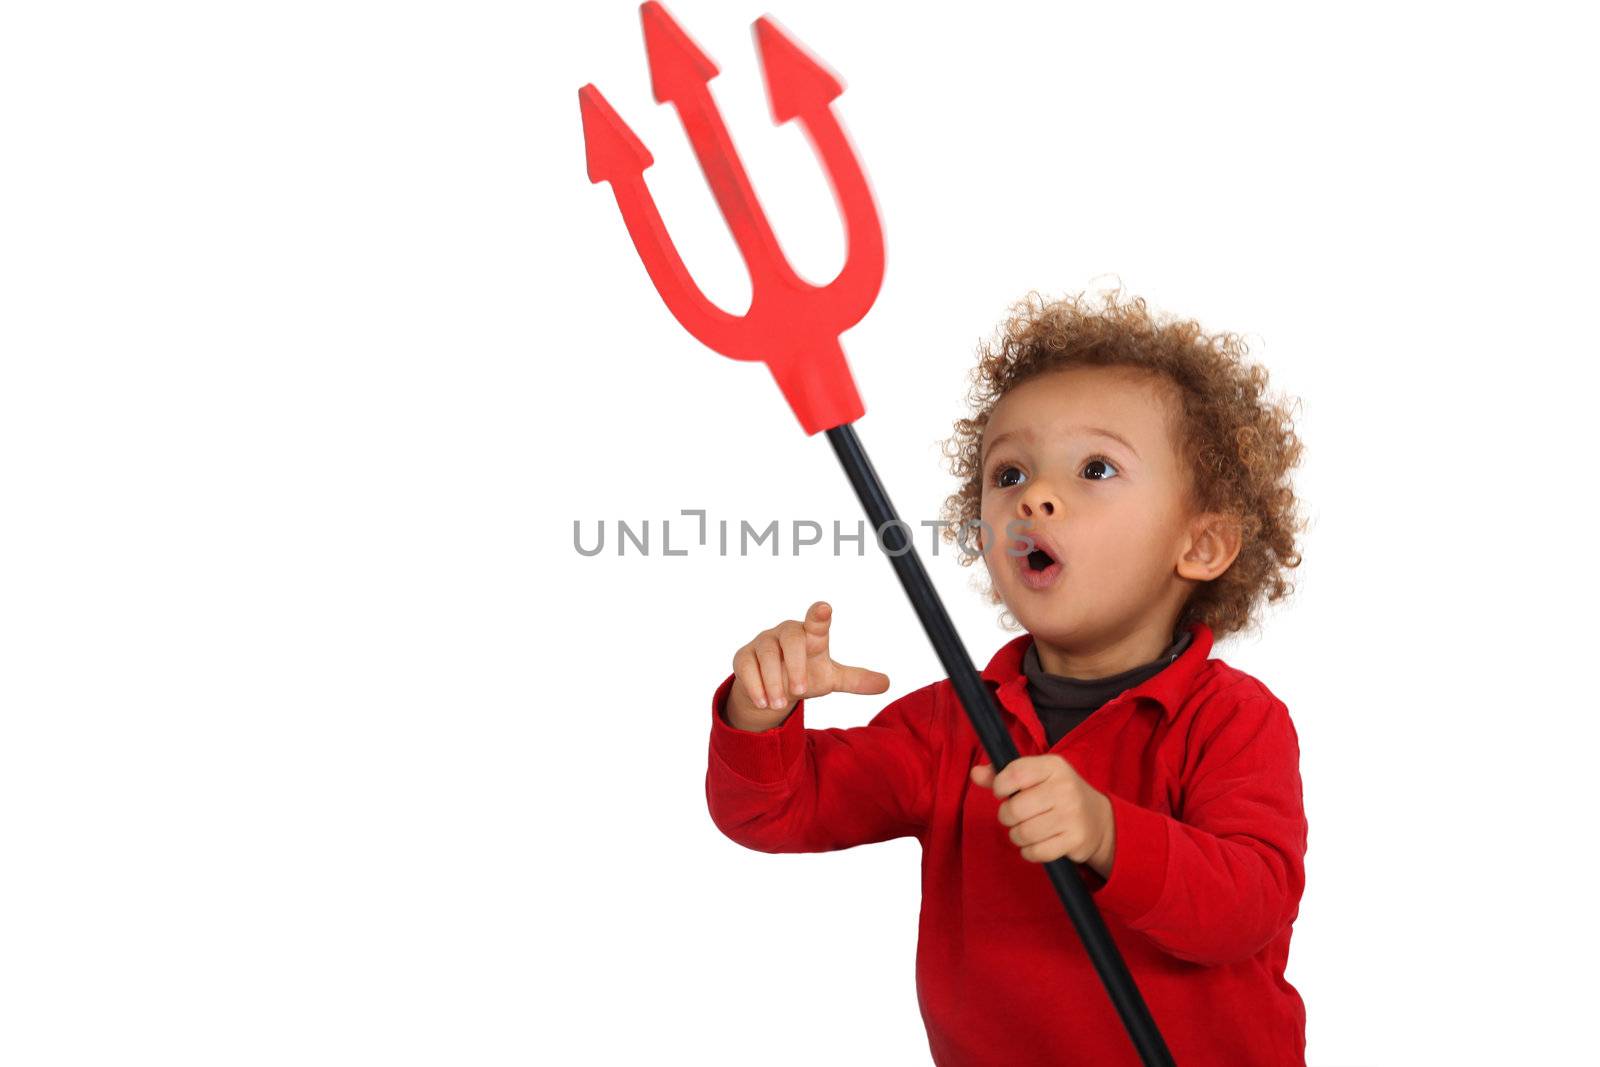 Young child holding up a devil's fork